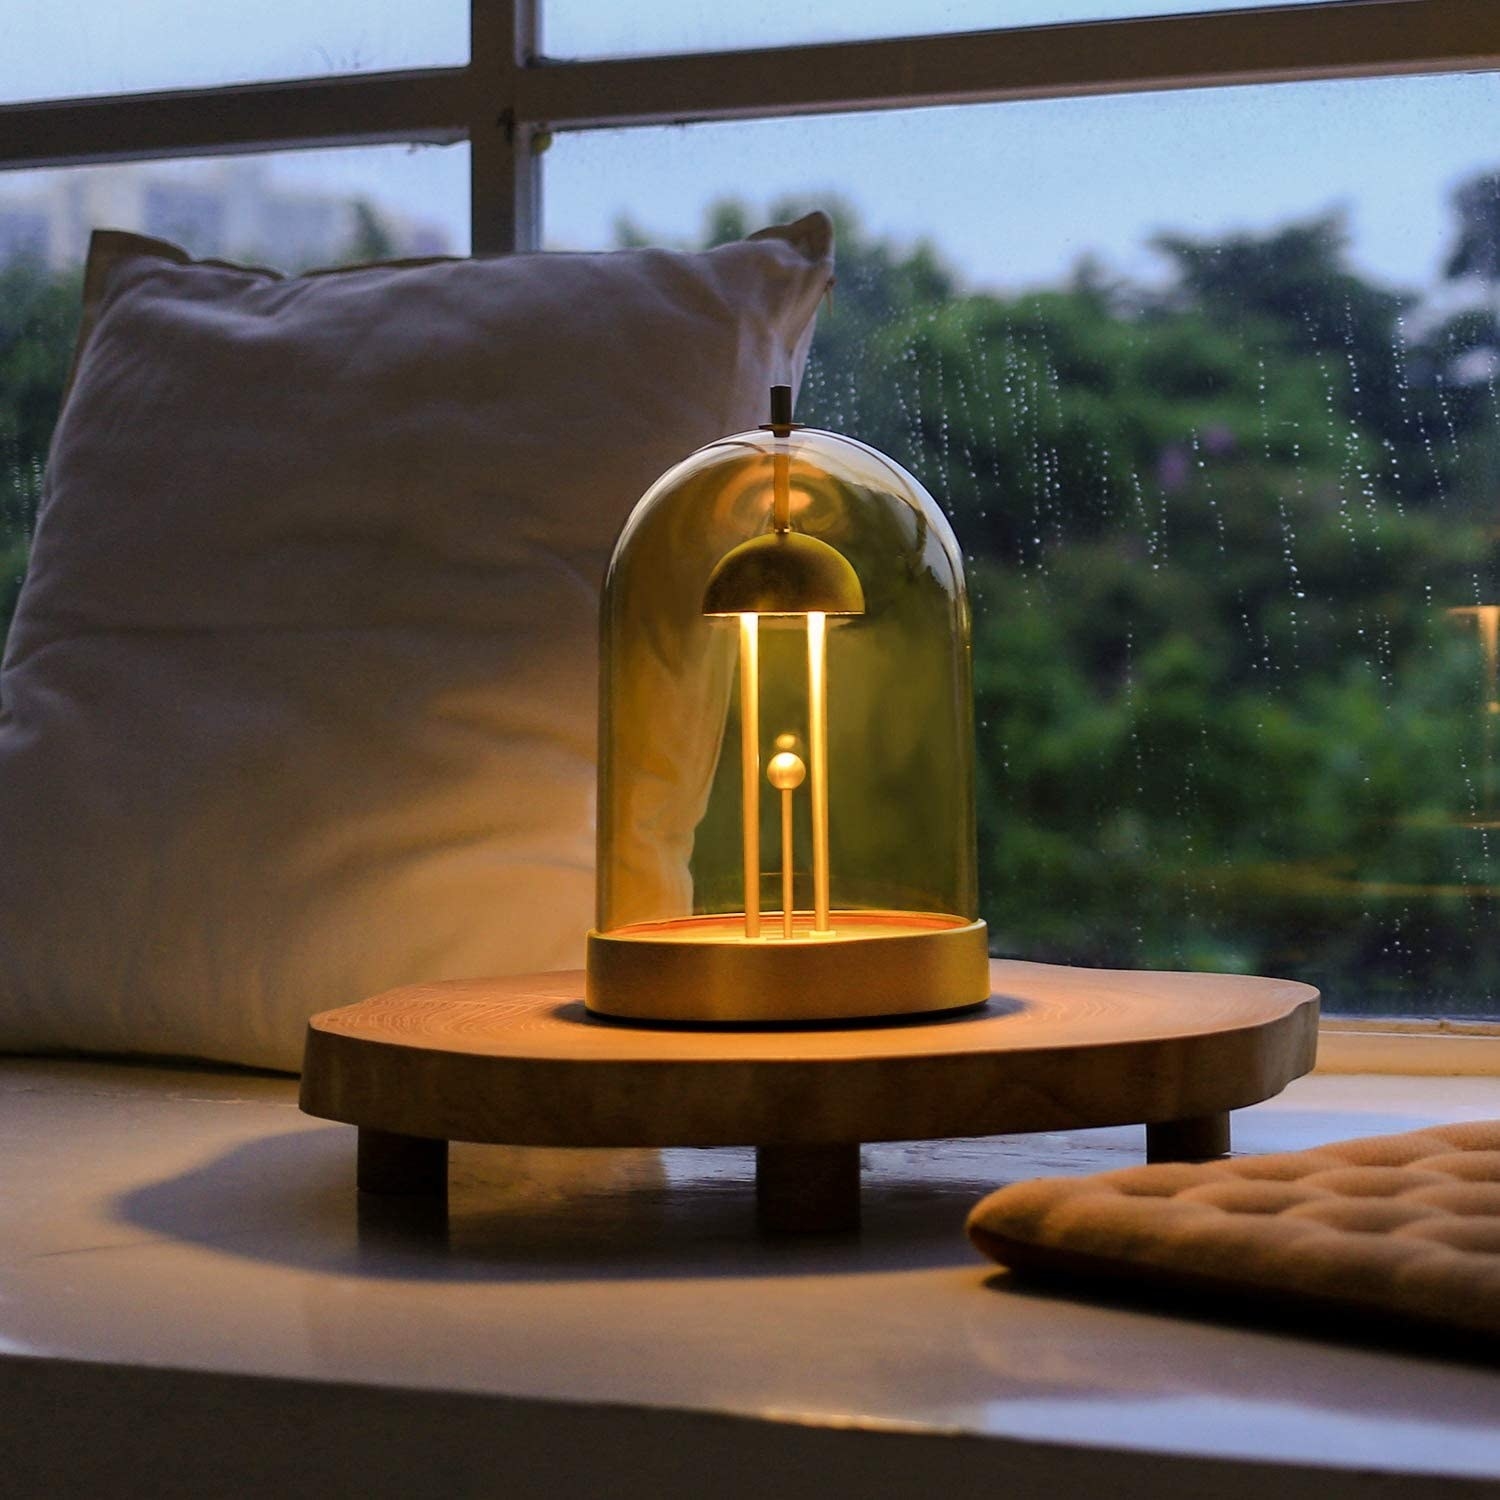 The lamp on a table surrounded by throw cushions